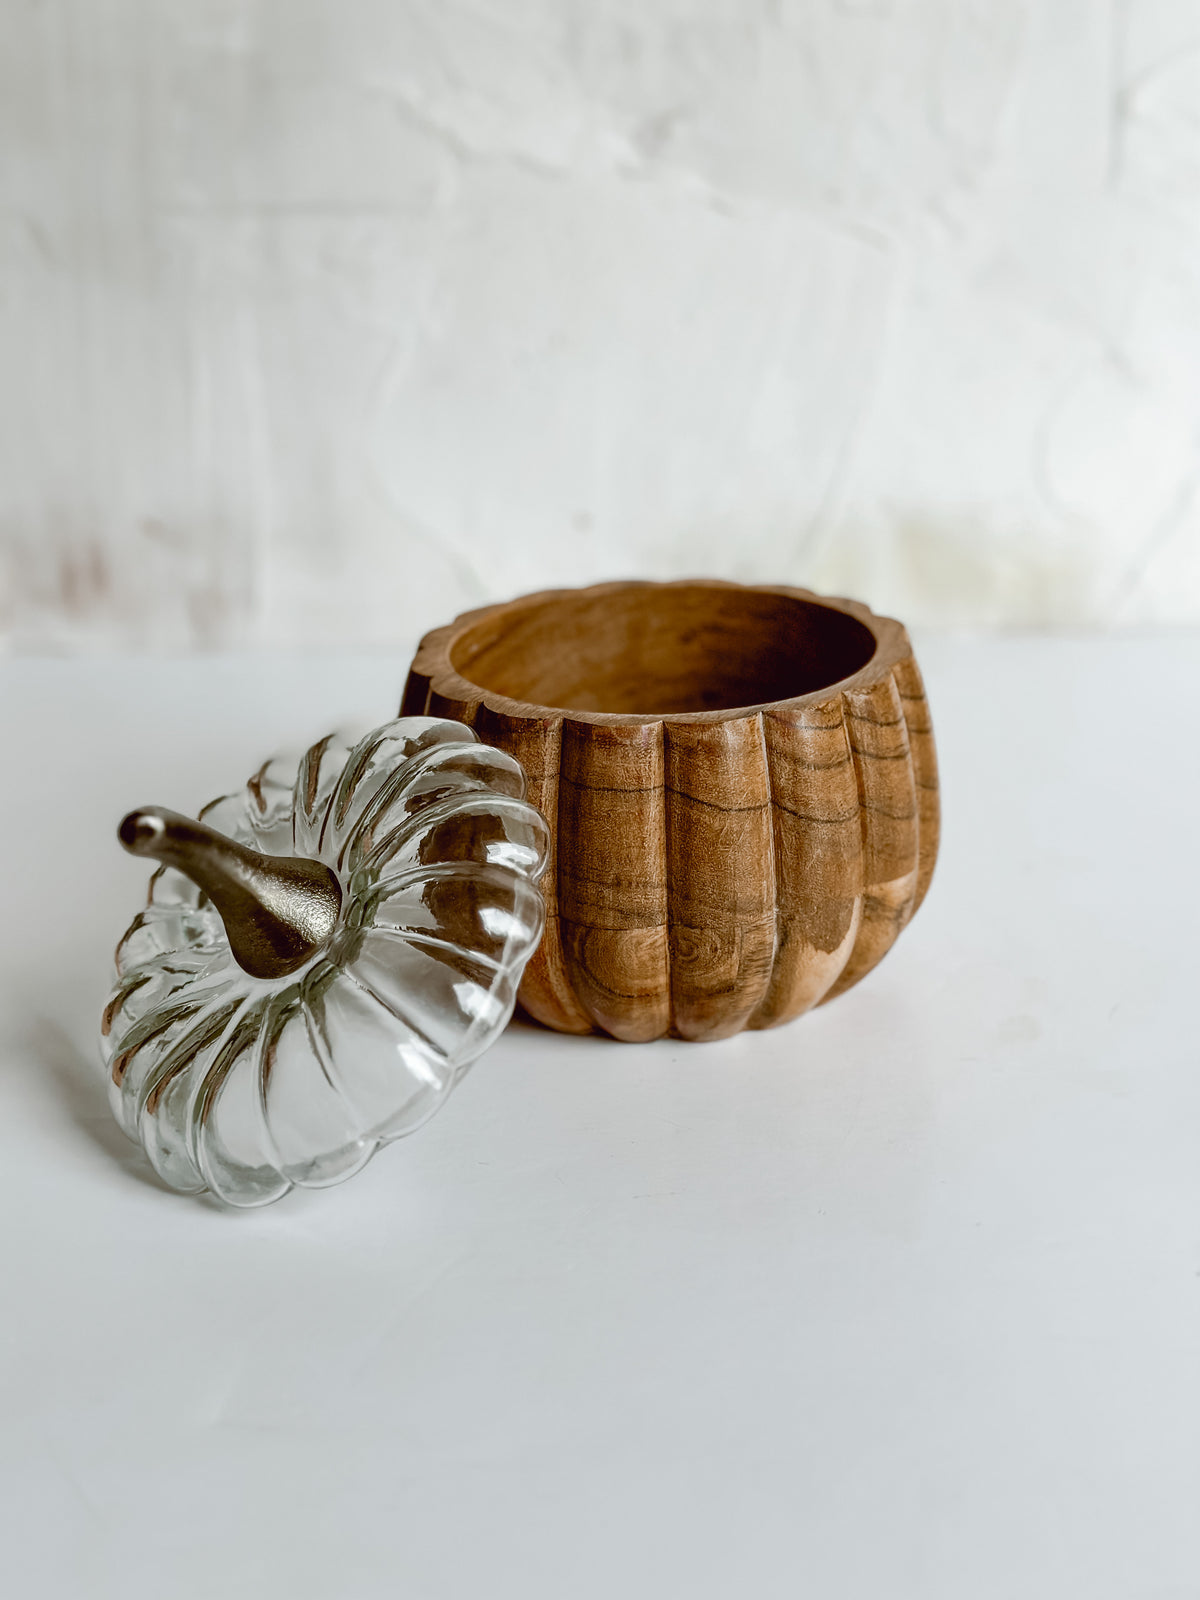 Fairfield Wood Pumpkin Containers